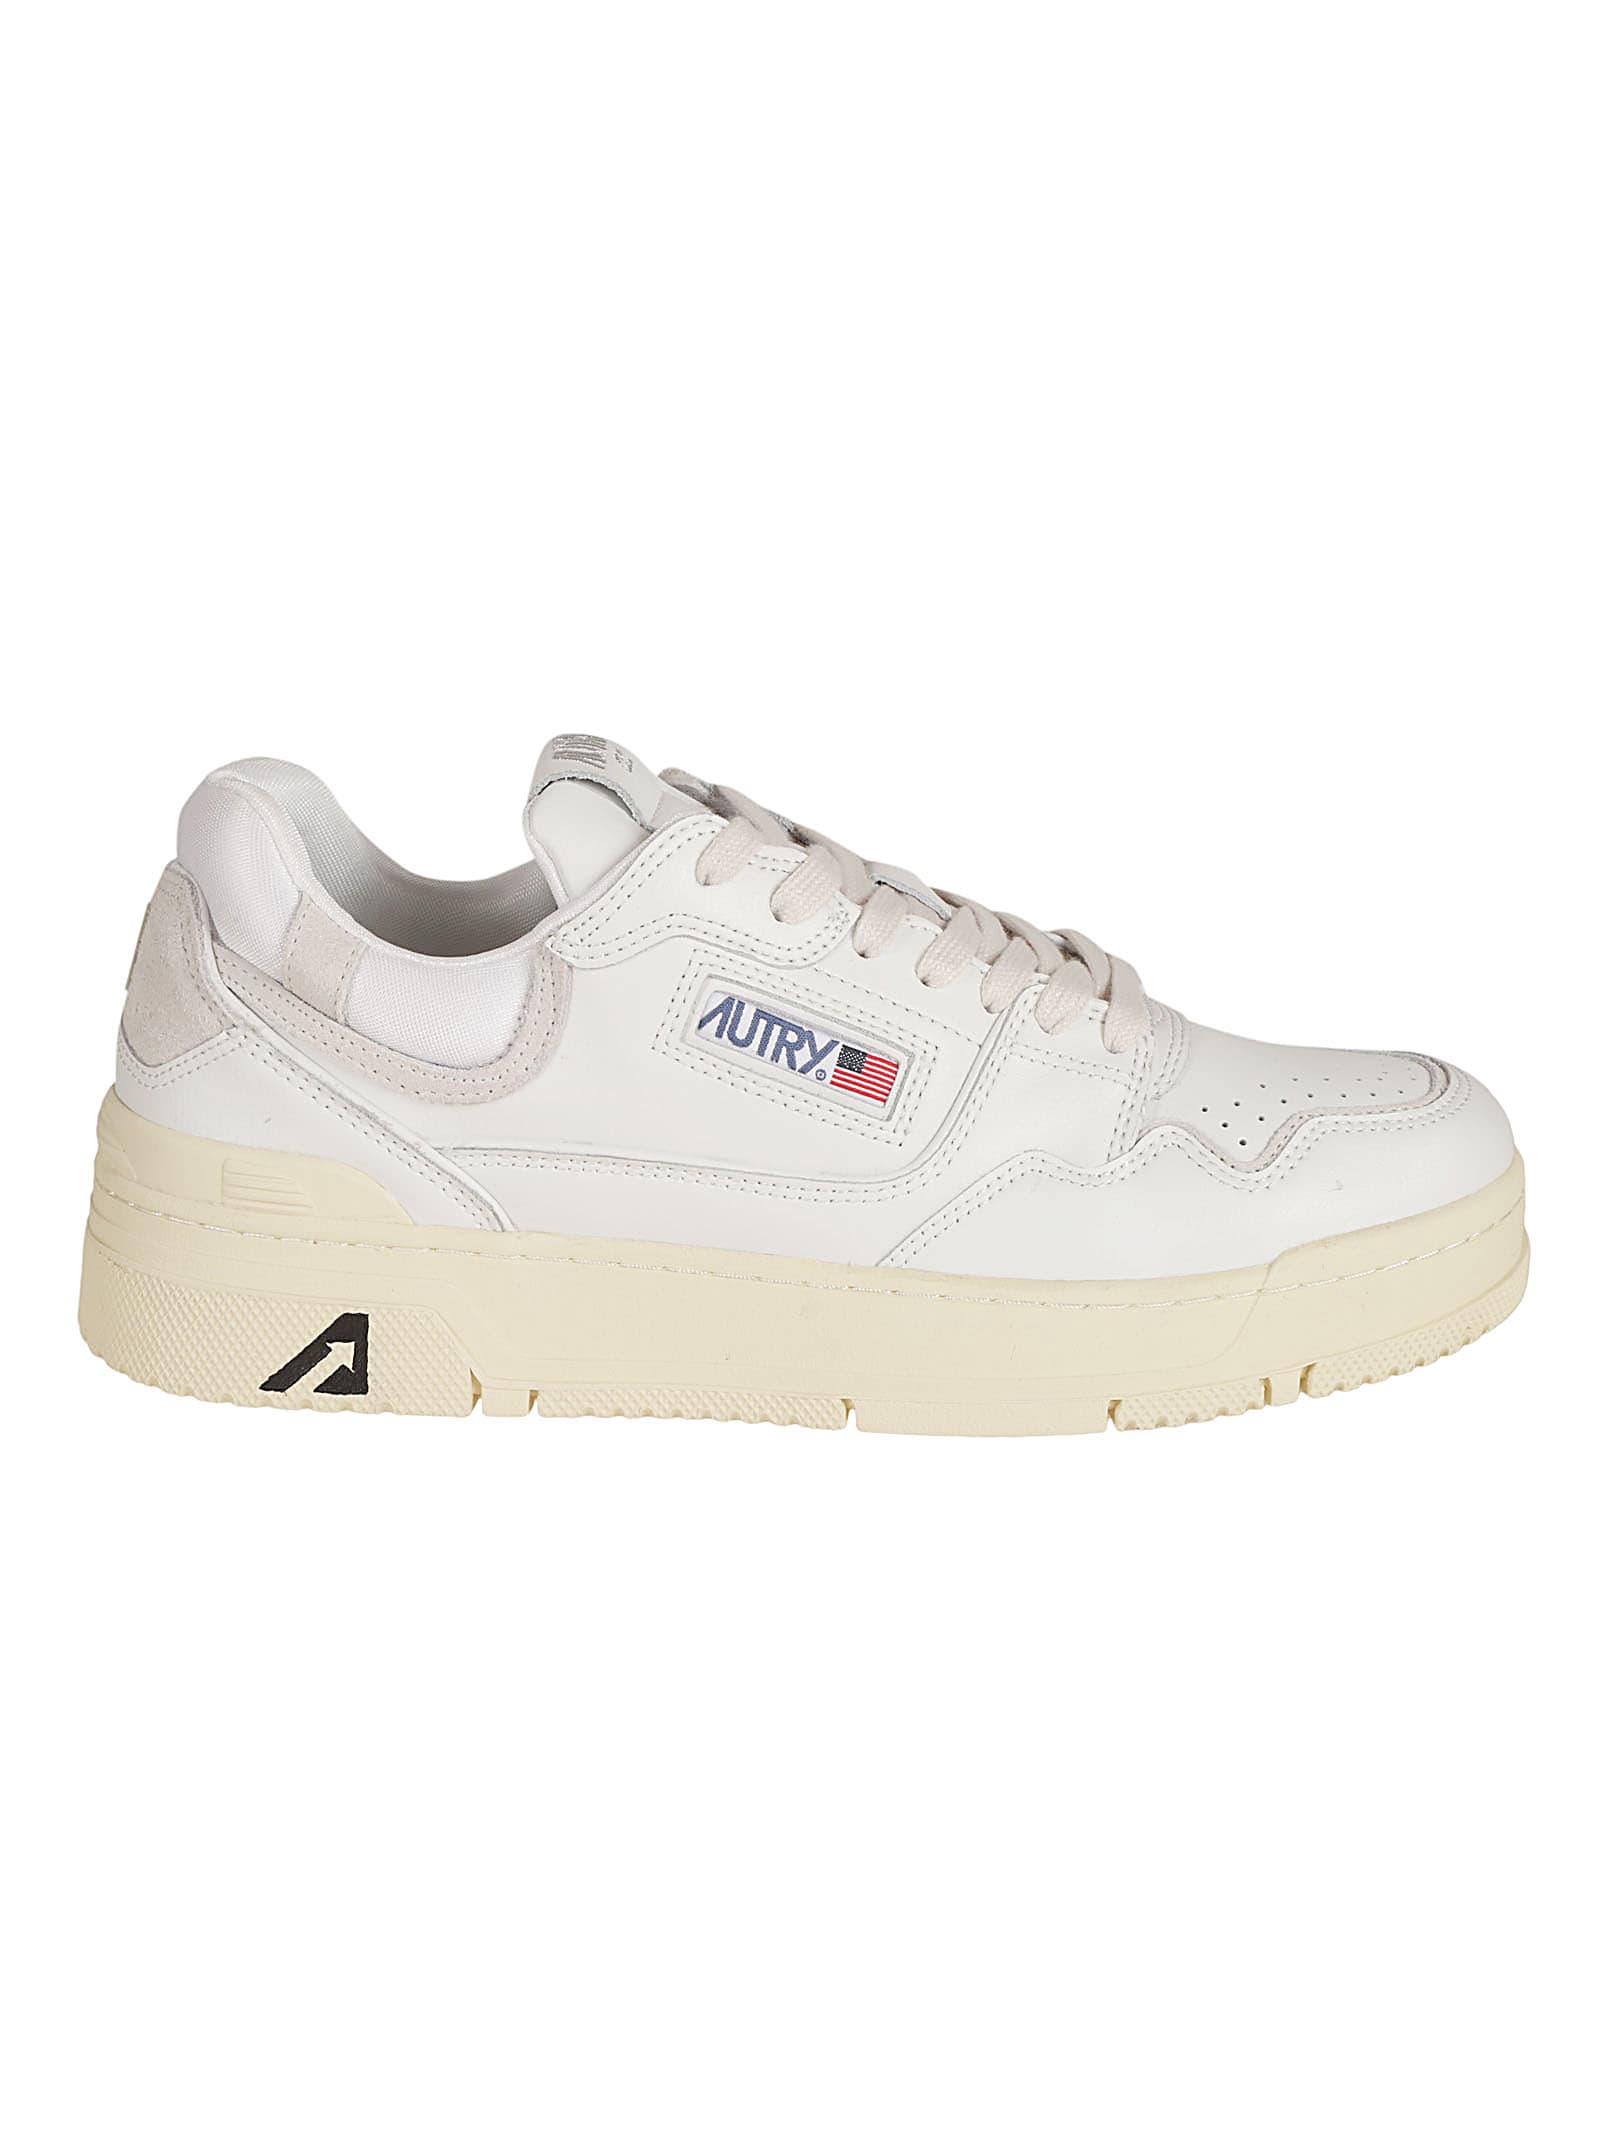 Autry Clc Low Man Sneakers In Multicolor/white